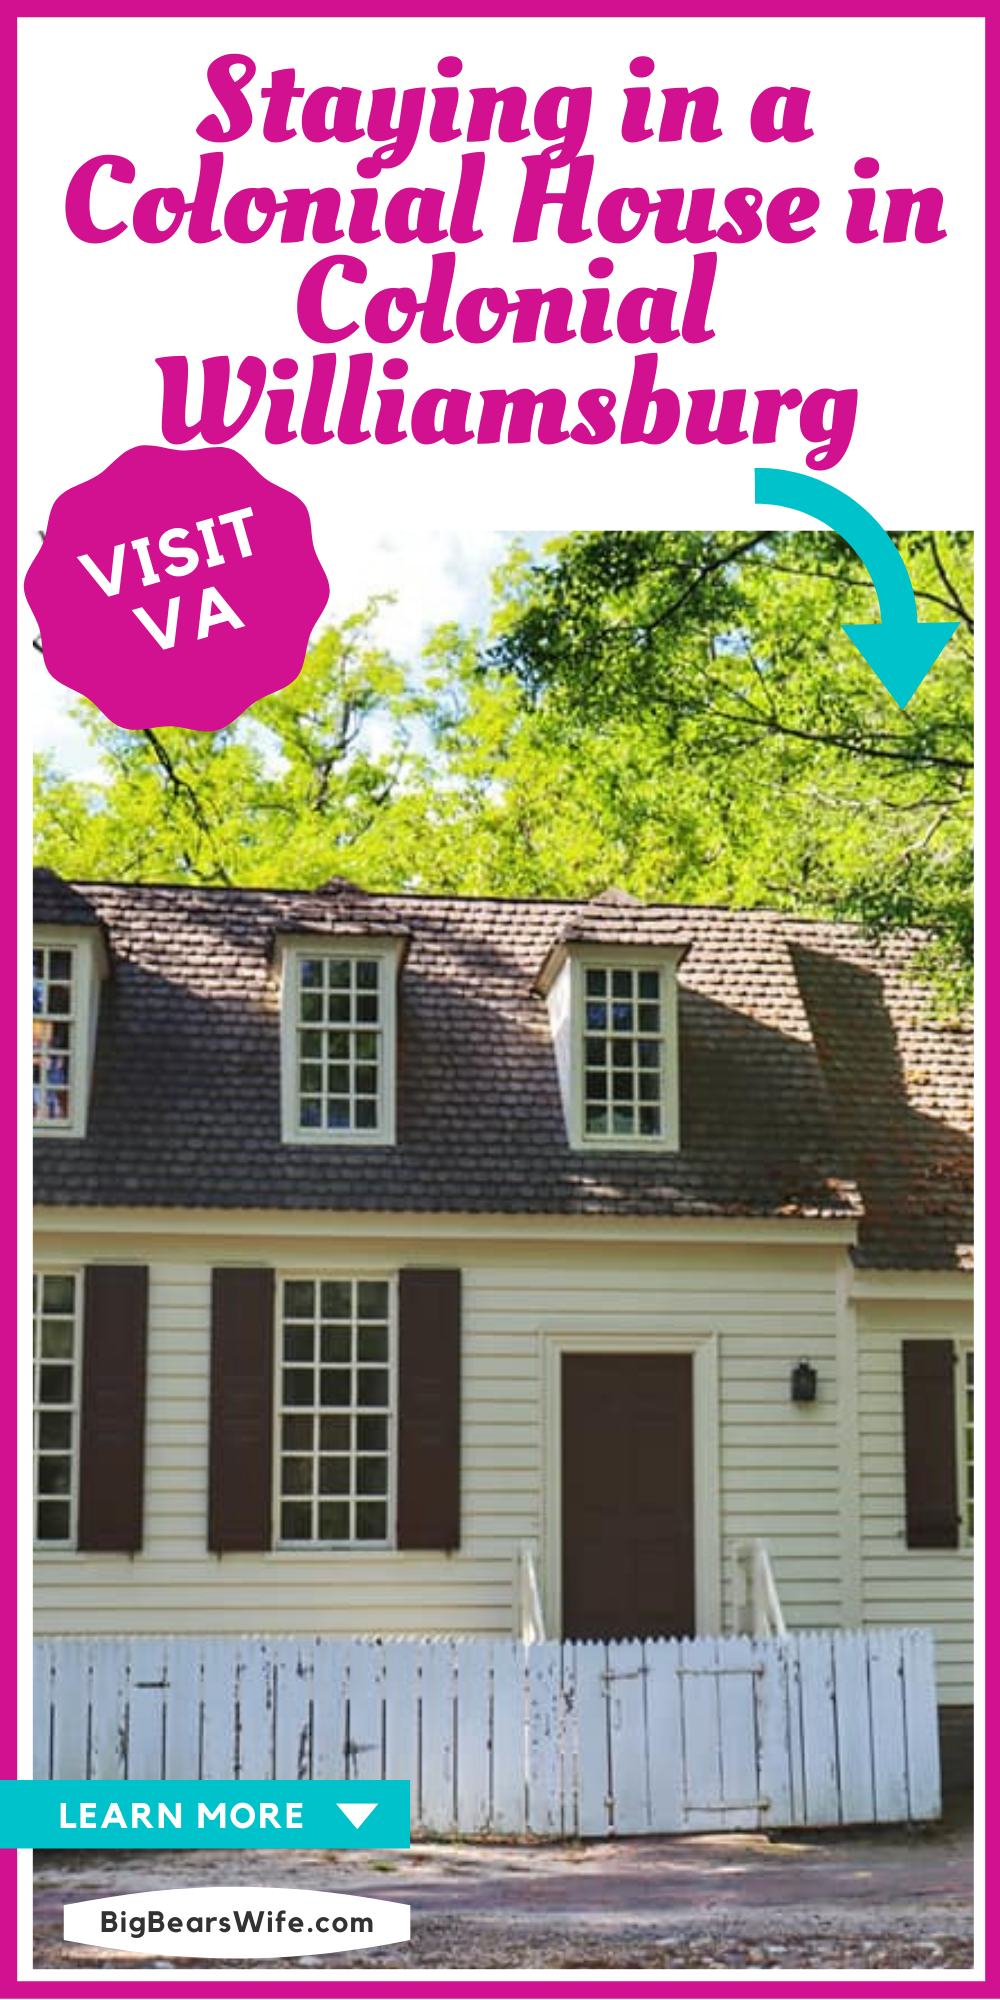 We took a look weekend trip for Mothers Day to Colonial Williamsburg and opted to stay in one of the famous Colonial houses inside of Colonial Williamsburg! Take a look at the George Jackson Colonial house in historic Colonial Williamsburg as we're Staying in a Colonial House in Colonial Williamsburg! via @bigbearswife